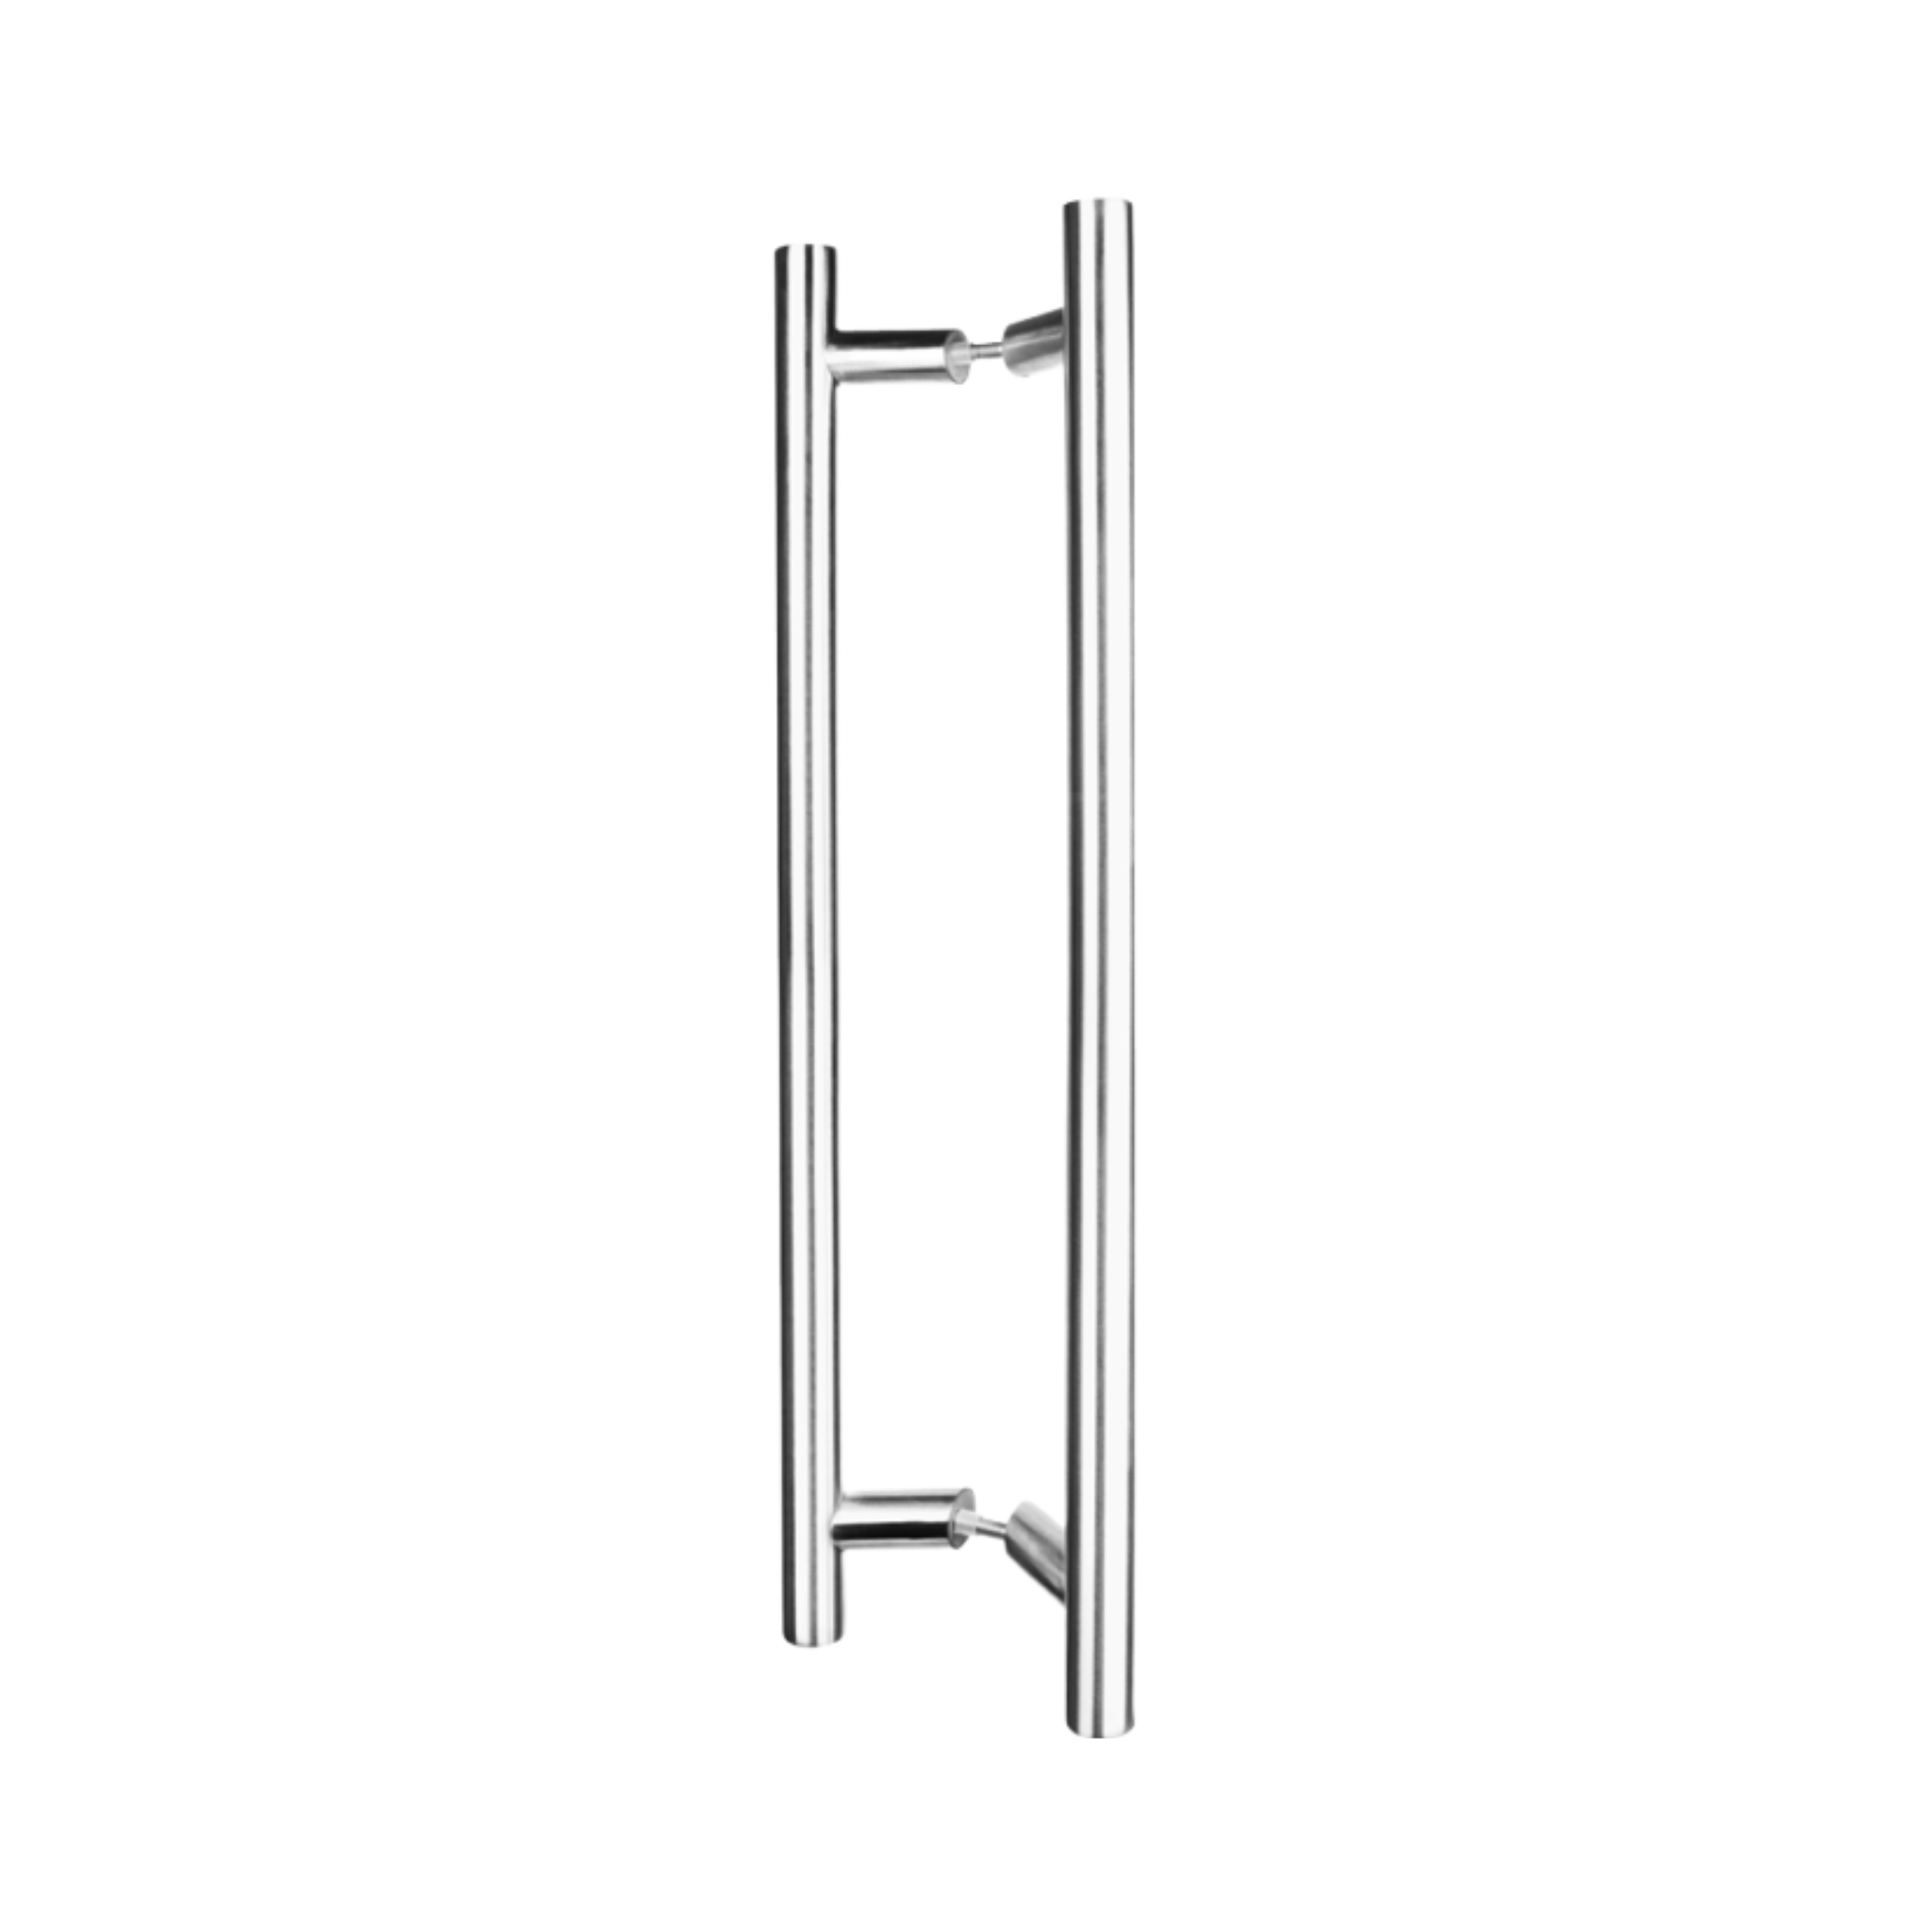 QS2701 Mitred T, Pull Handle, Round, Mitred, T Handle, BTB, 30mm (Ø) x 600mm (l) x 500mm (ctc), Stainless Steel, QS